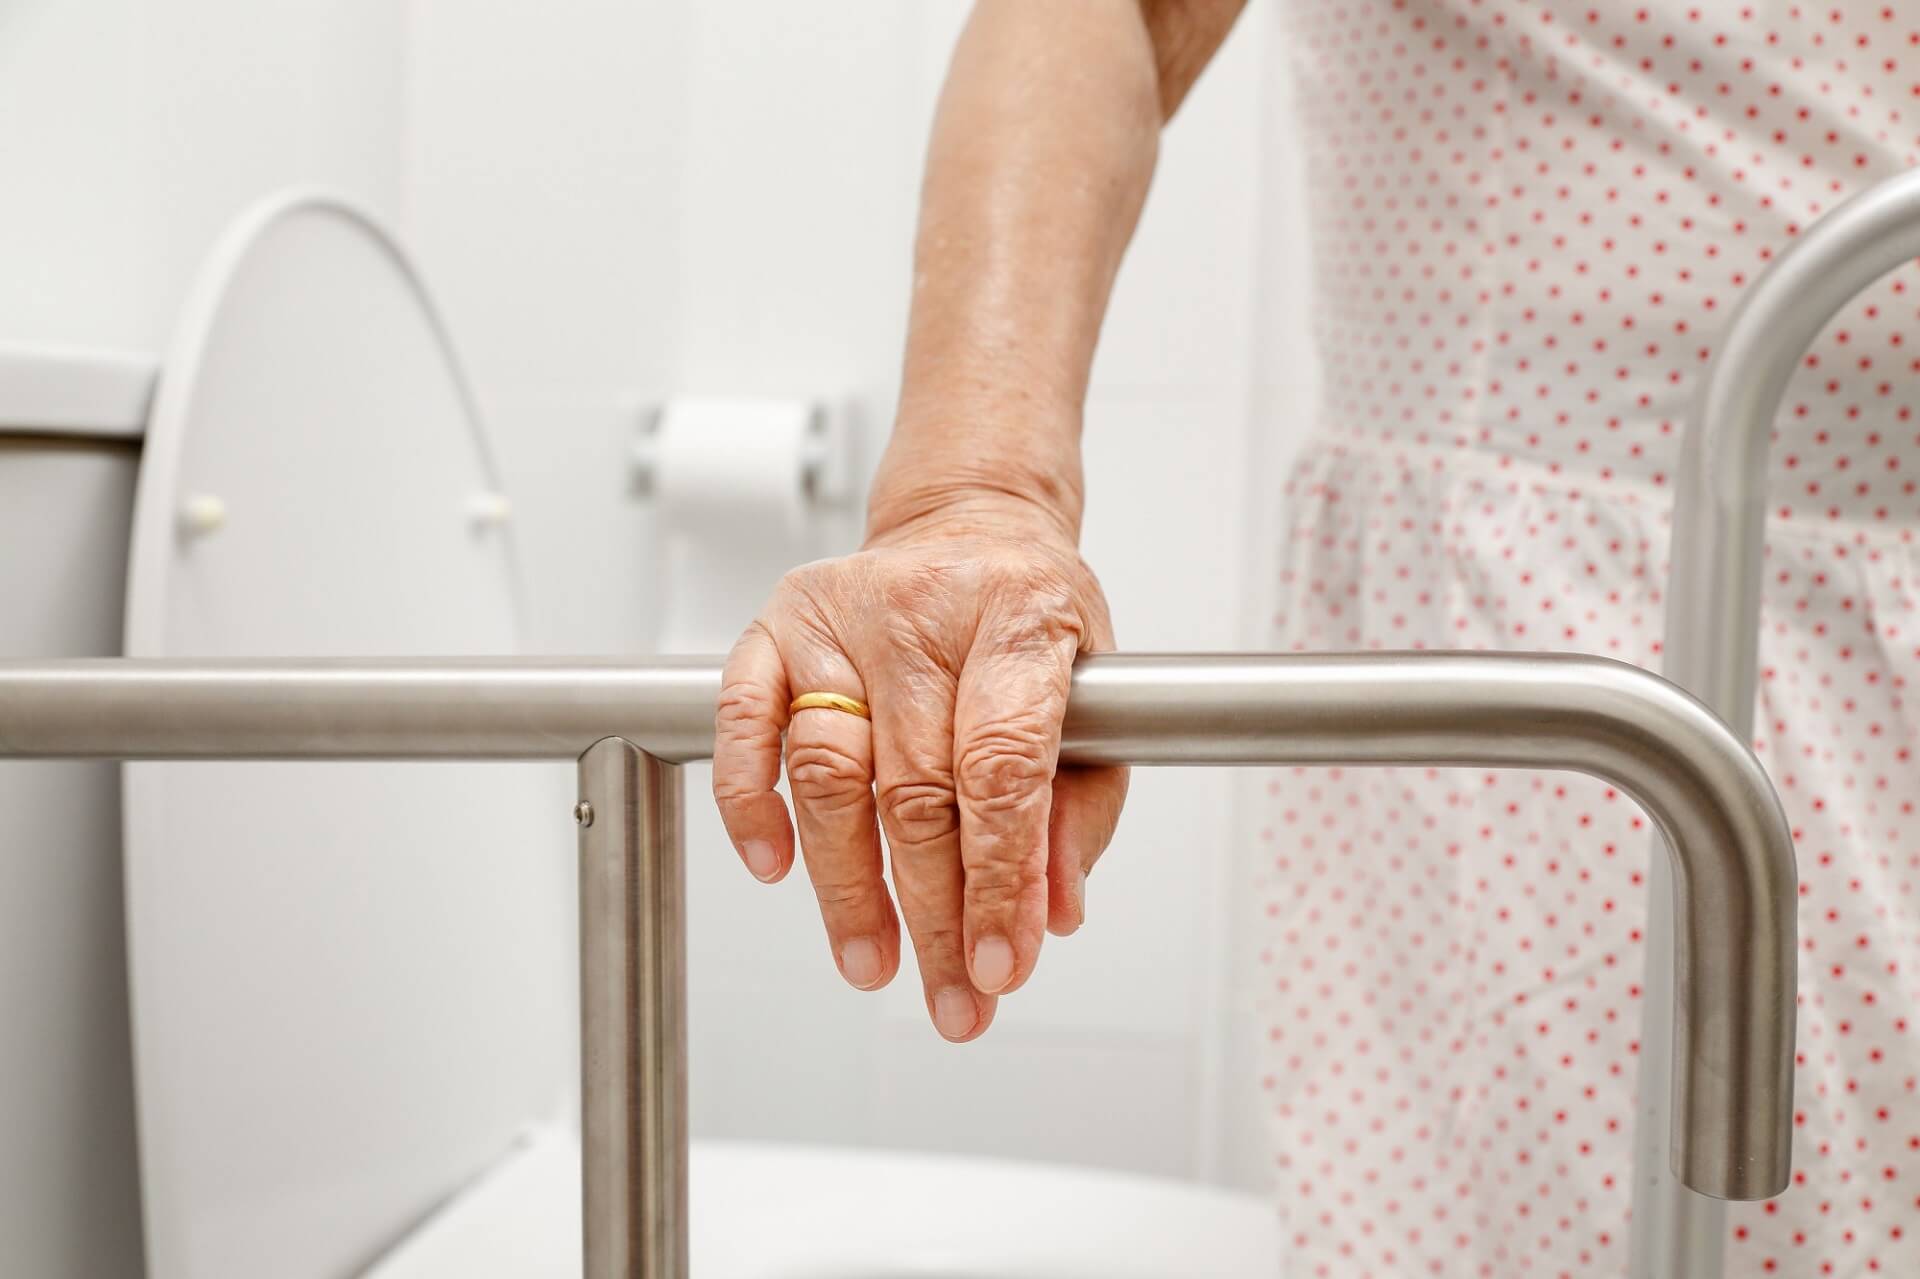  A senior woman using a grab bar in the bathroom for support to prevent falls.